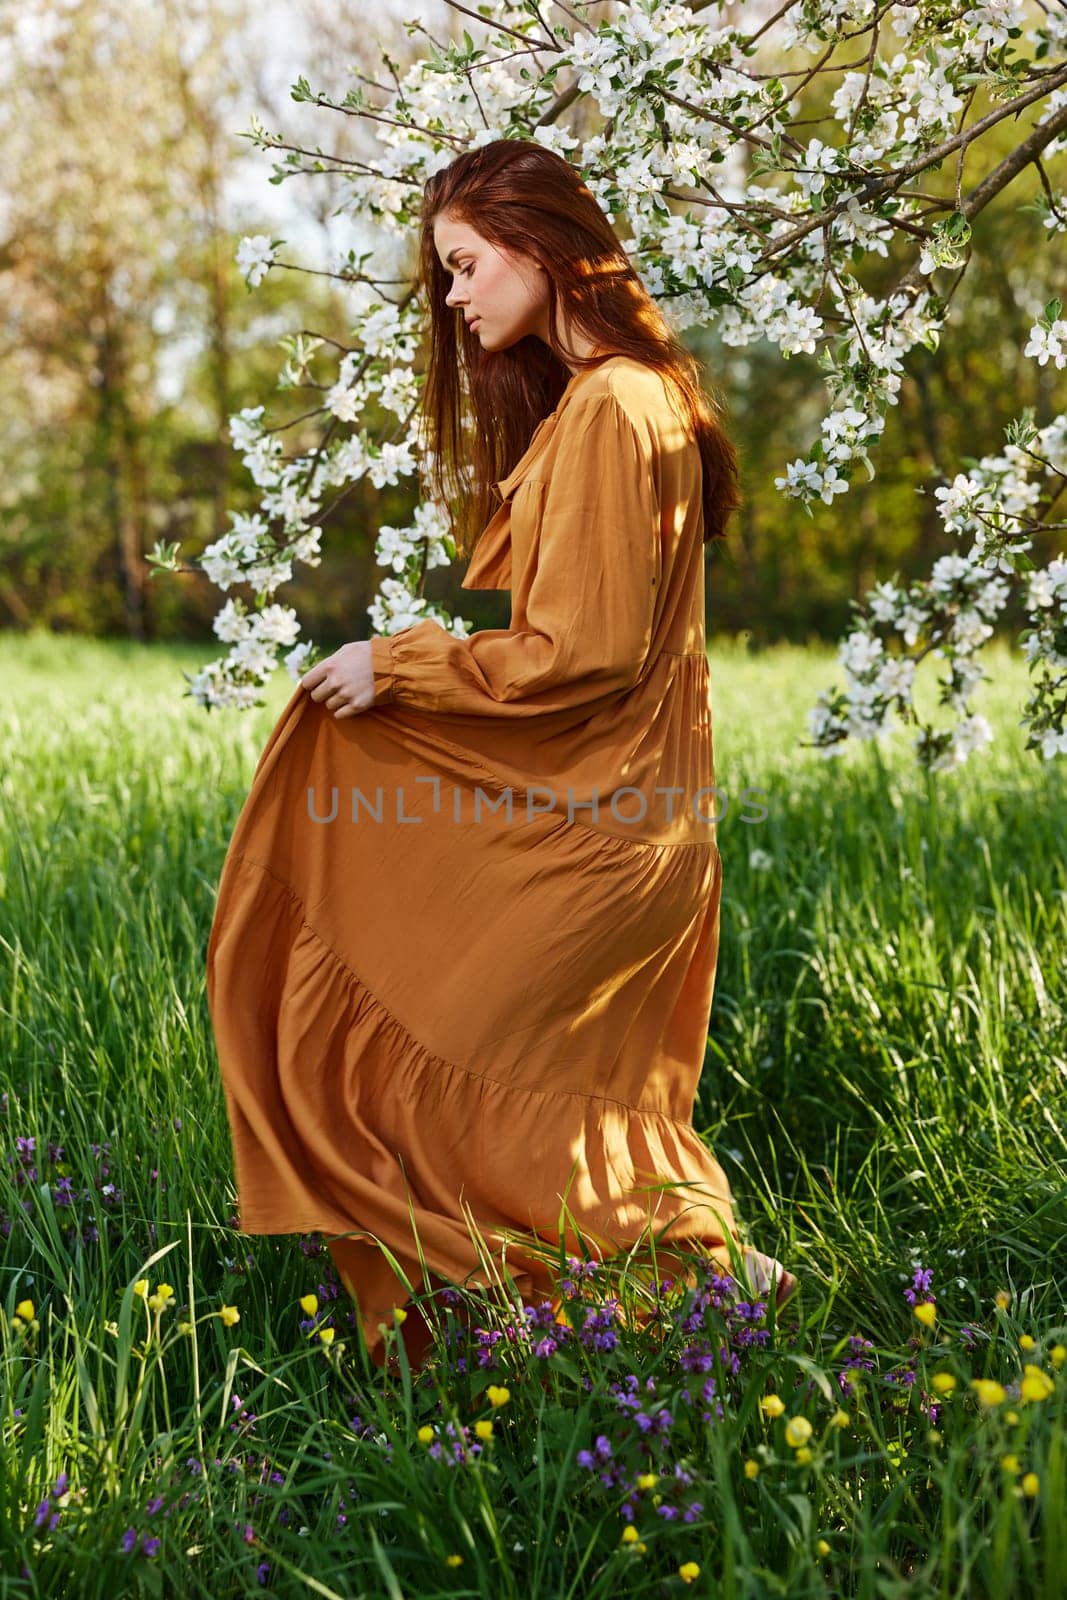 a happy, slender, sweet woman stands in a long orange dress in the tall grass near a flowering tree and happily smiling throws up the hem of her dress, looking away. High quality photo